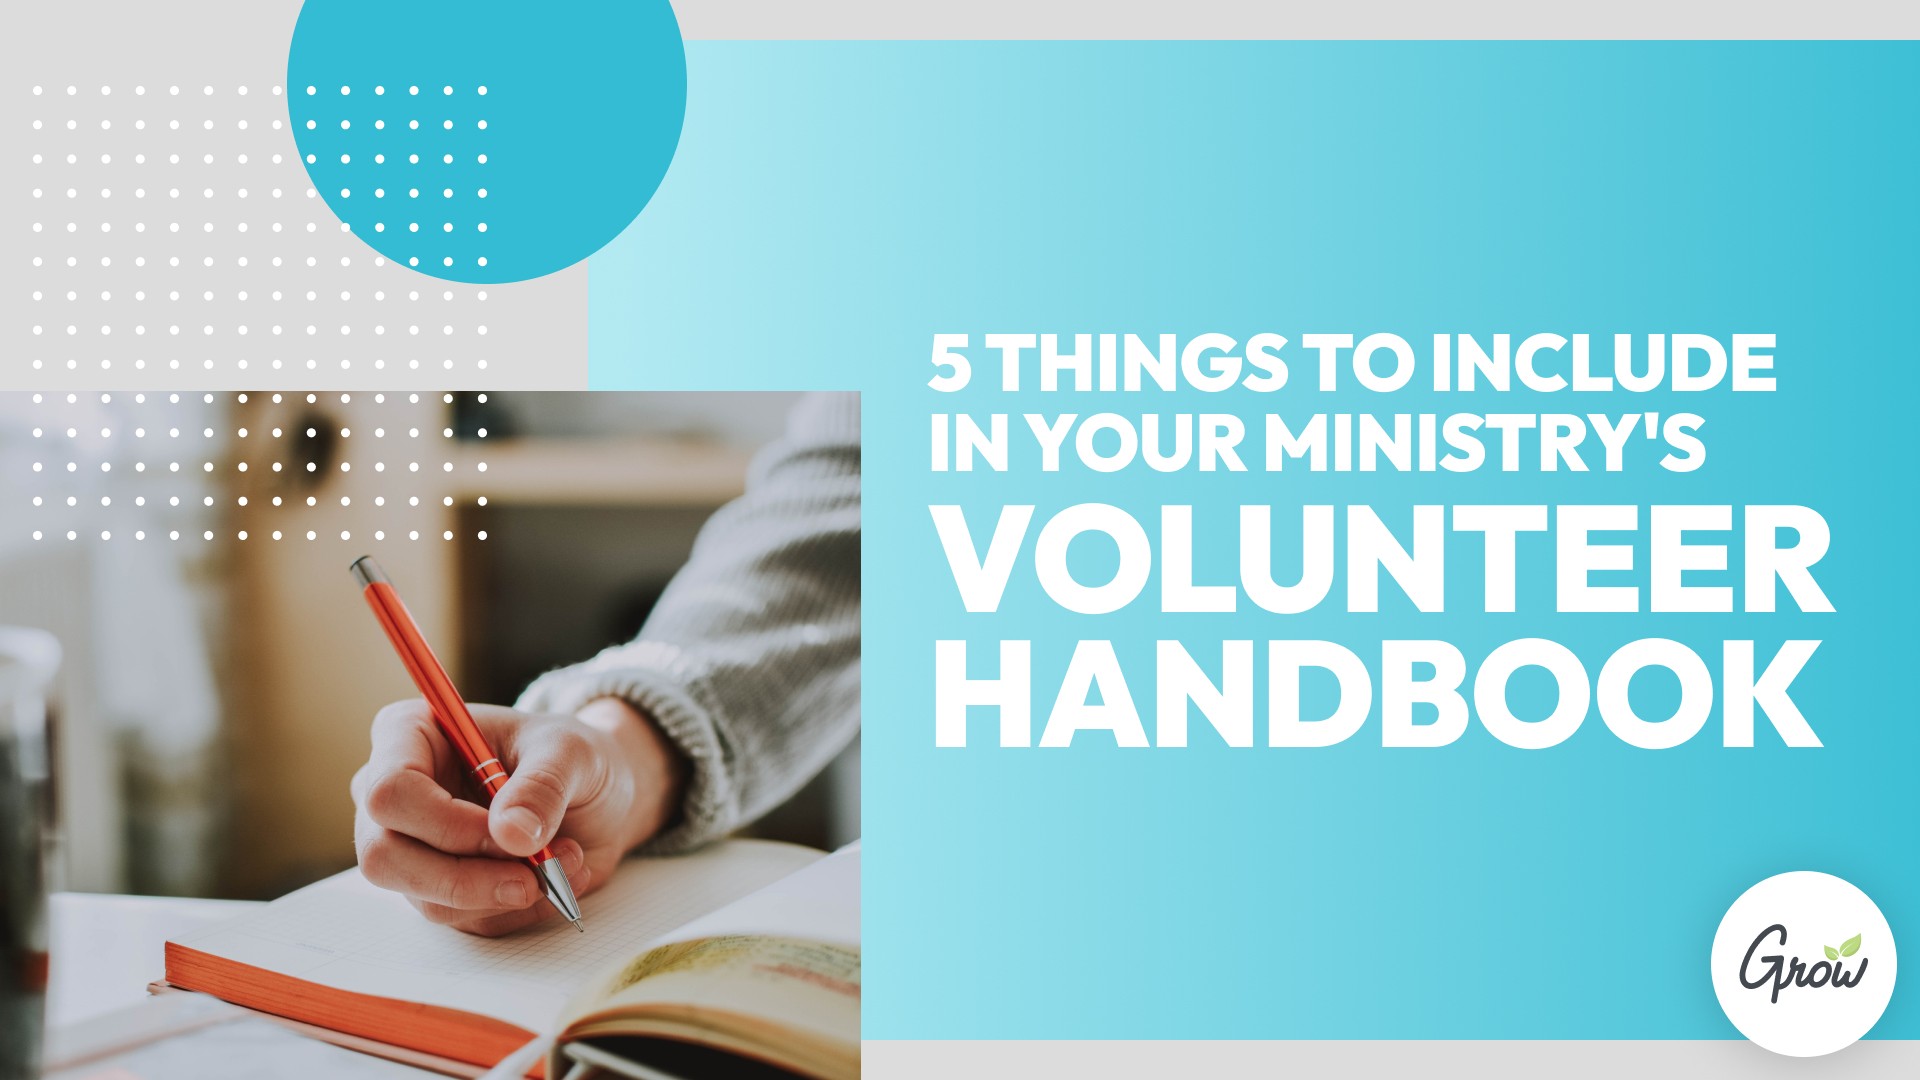 5 Things to Include in Your Ministry's Volunteer Handbook